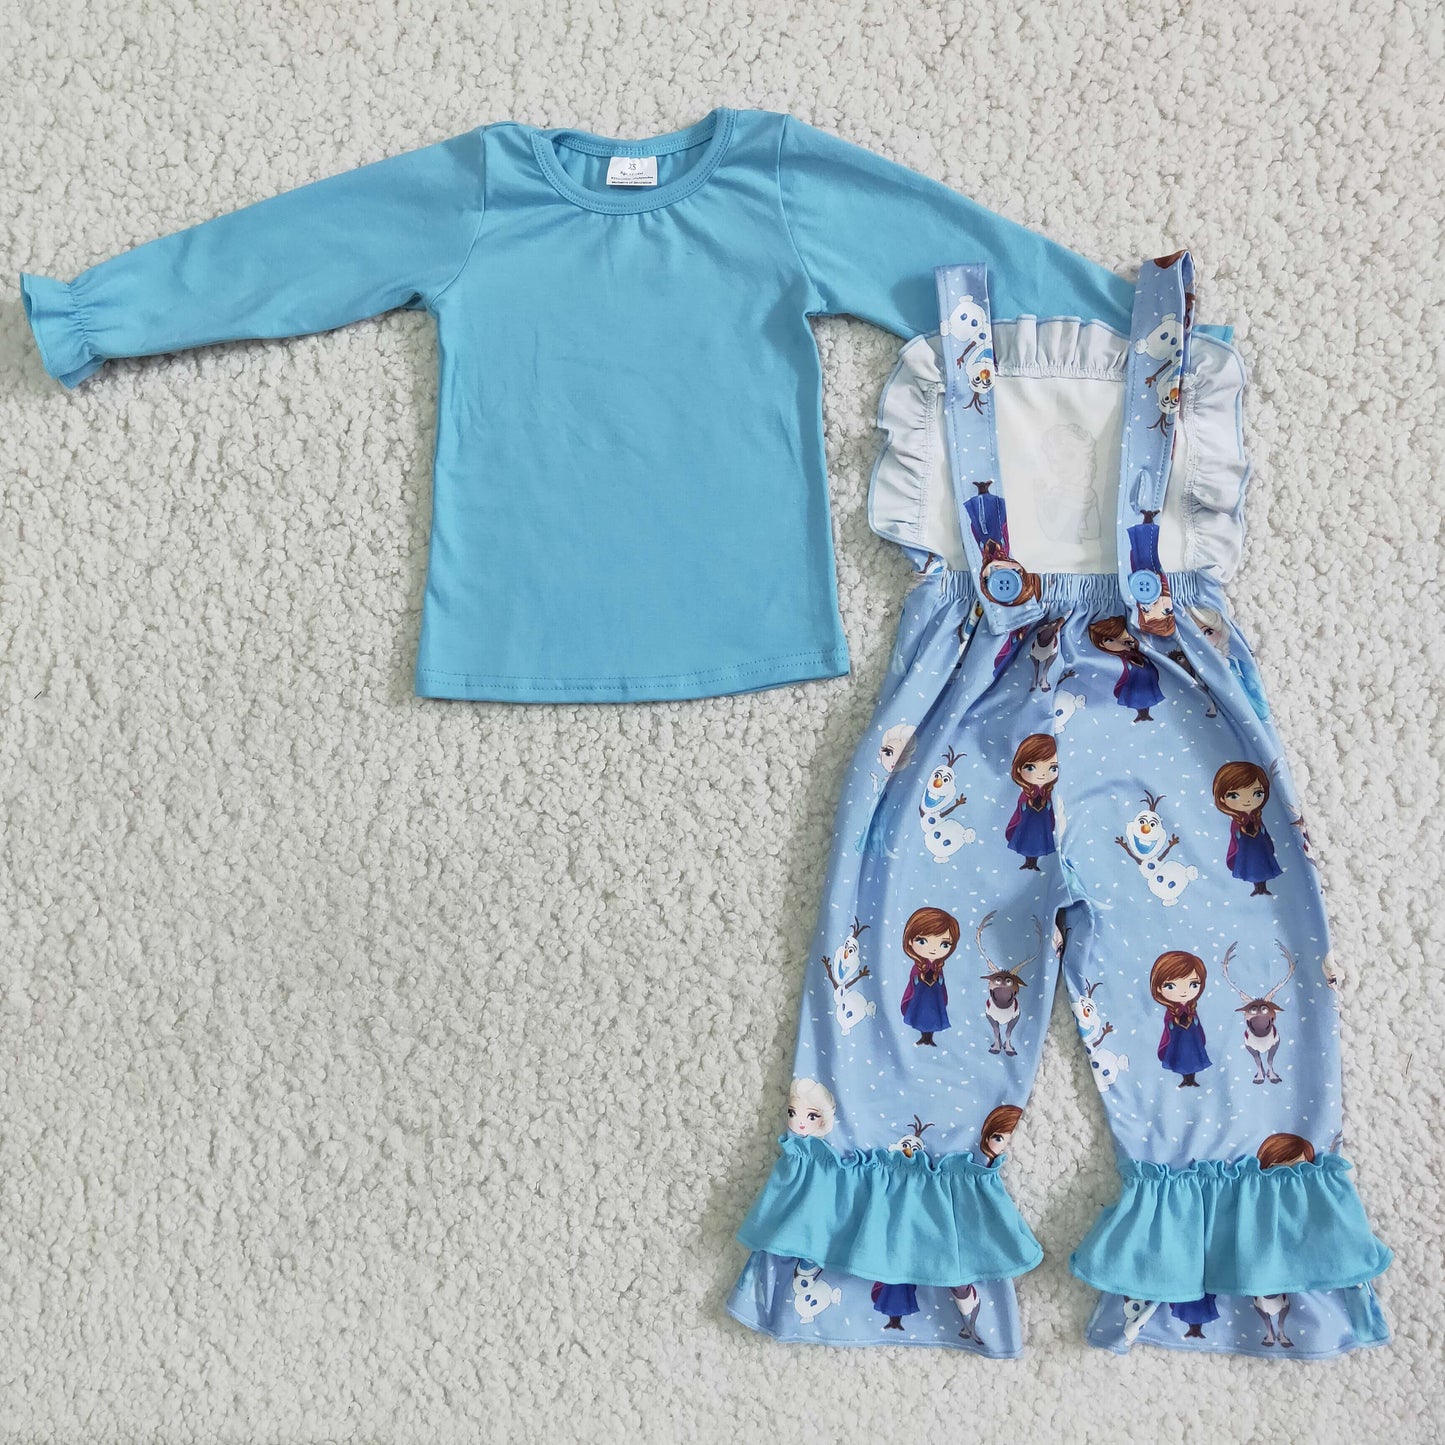 Blue cotton shirt ice overalls girls boutique clothing